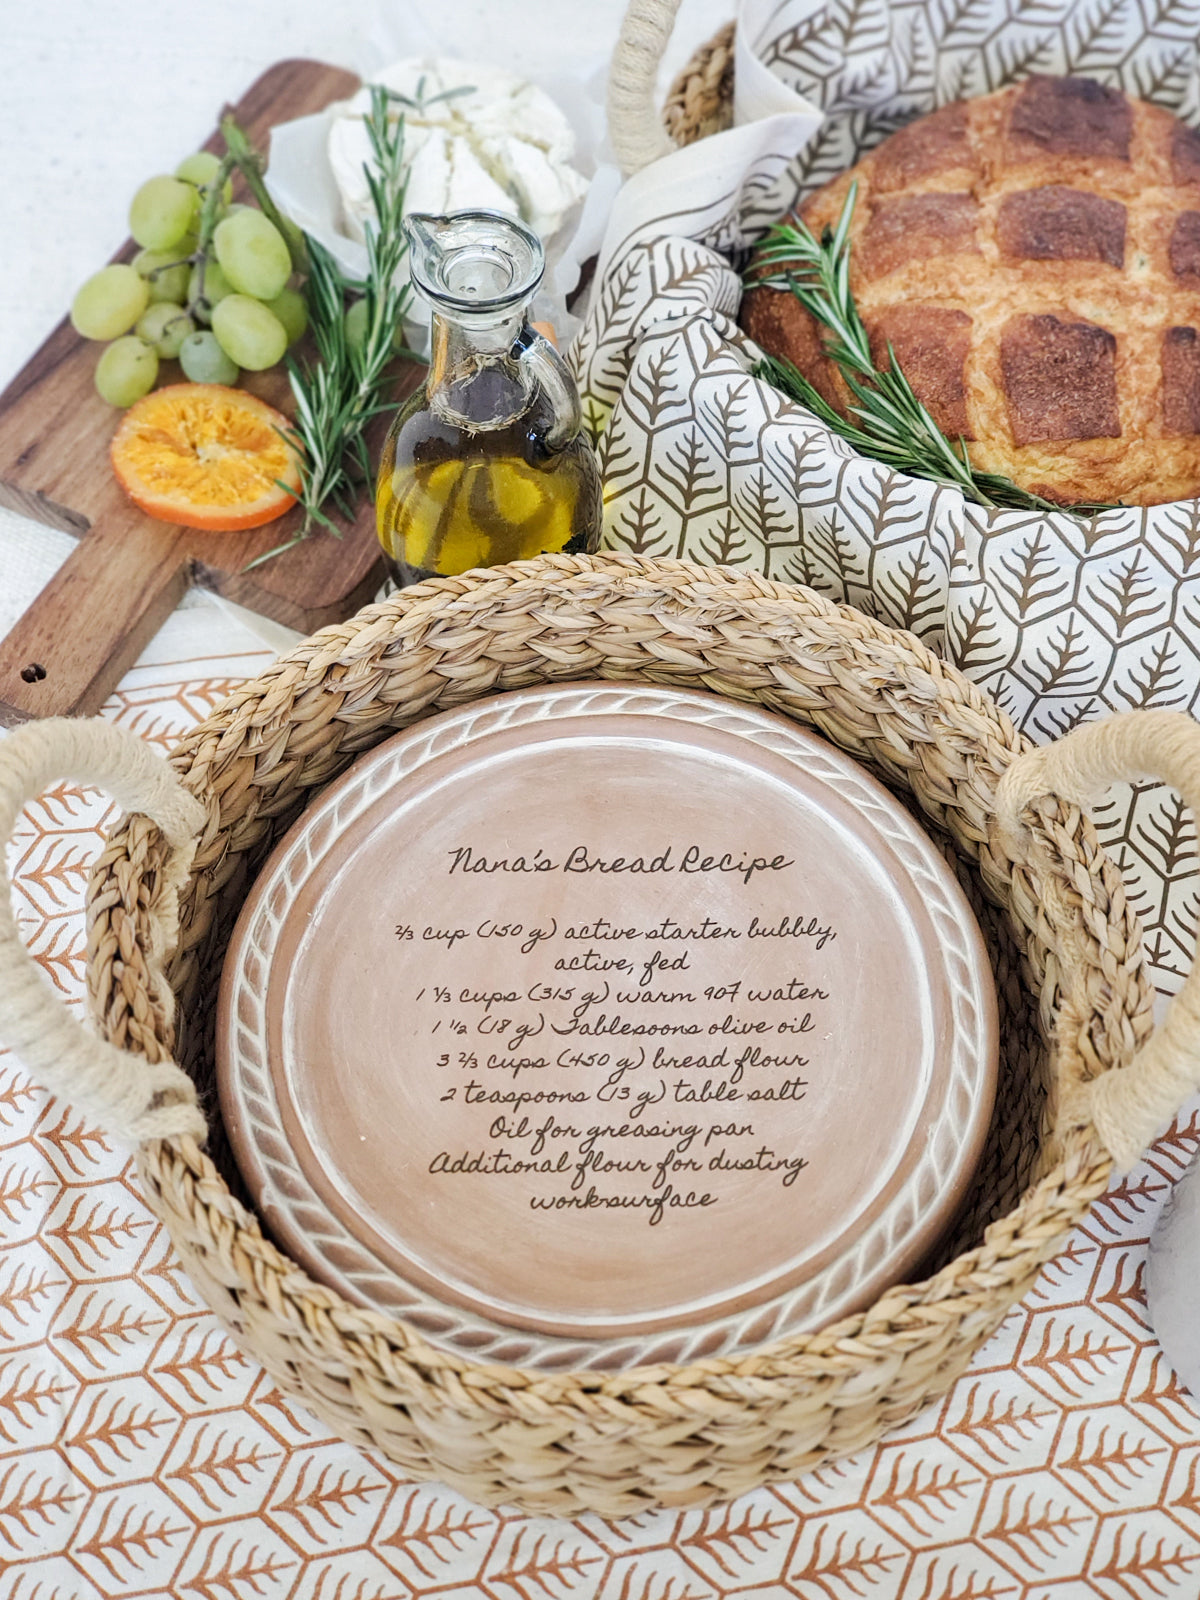 Personalized Bread Warmer & Basket Gift Set with Tea Towel - Recipe Round